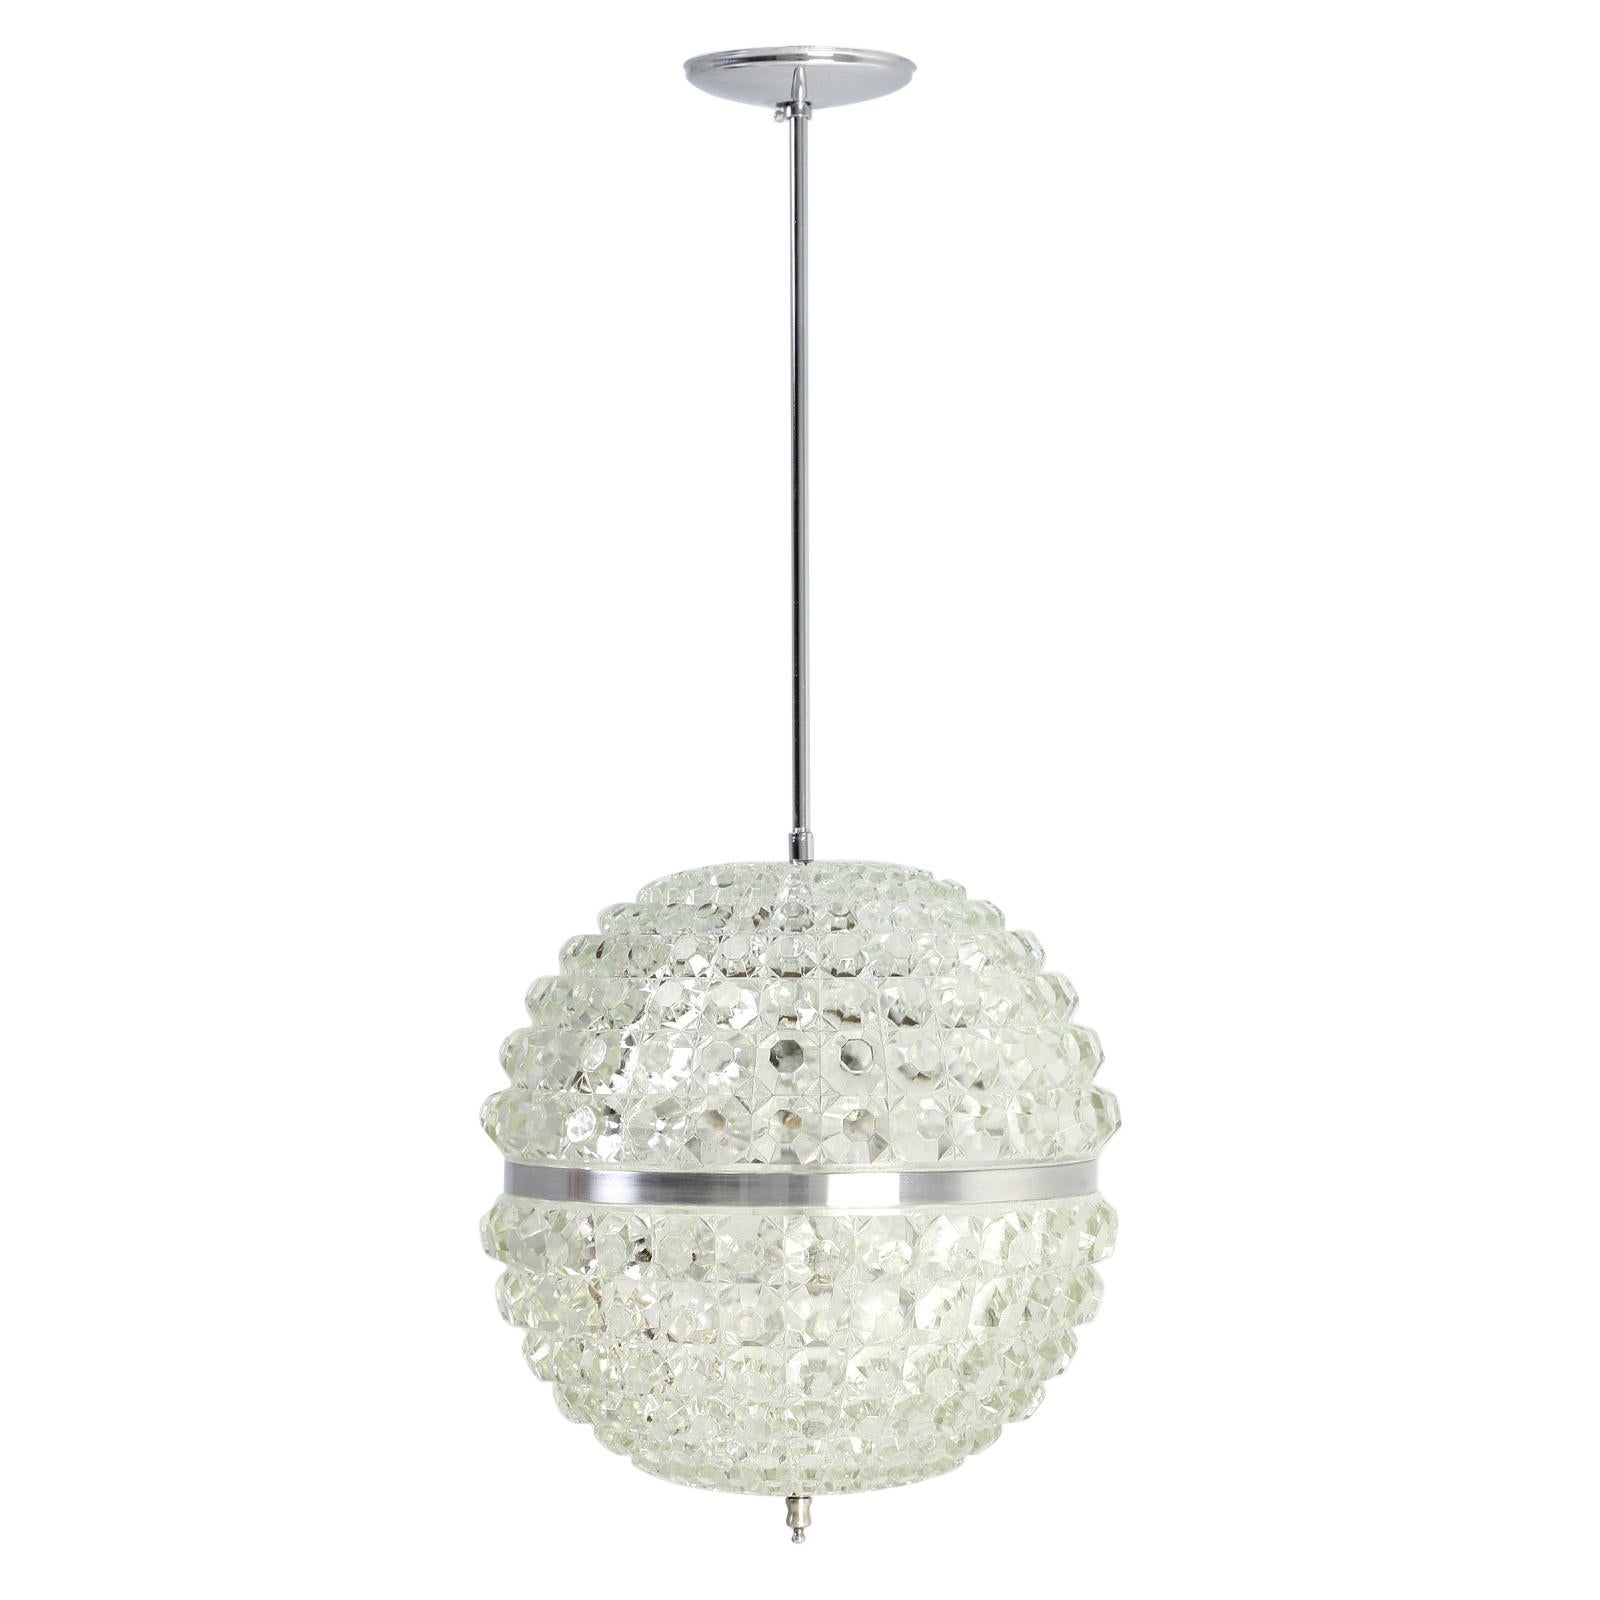 Mid-Century Modern Crystal Orb Pendant Fixture from Argentina For Sale